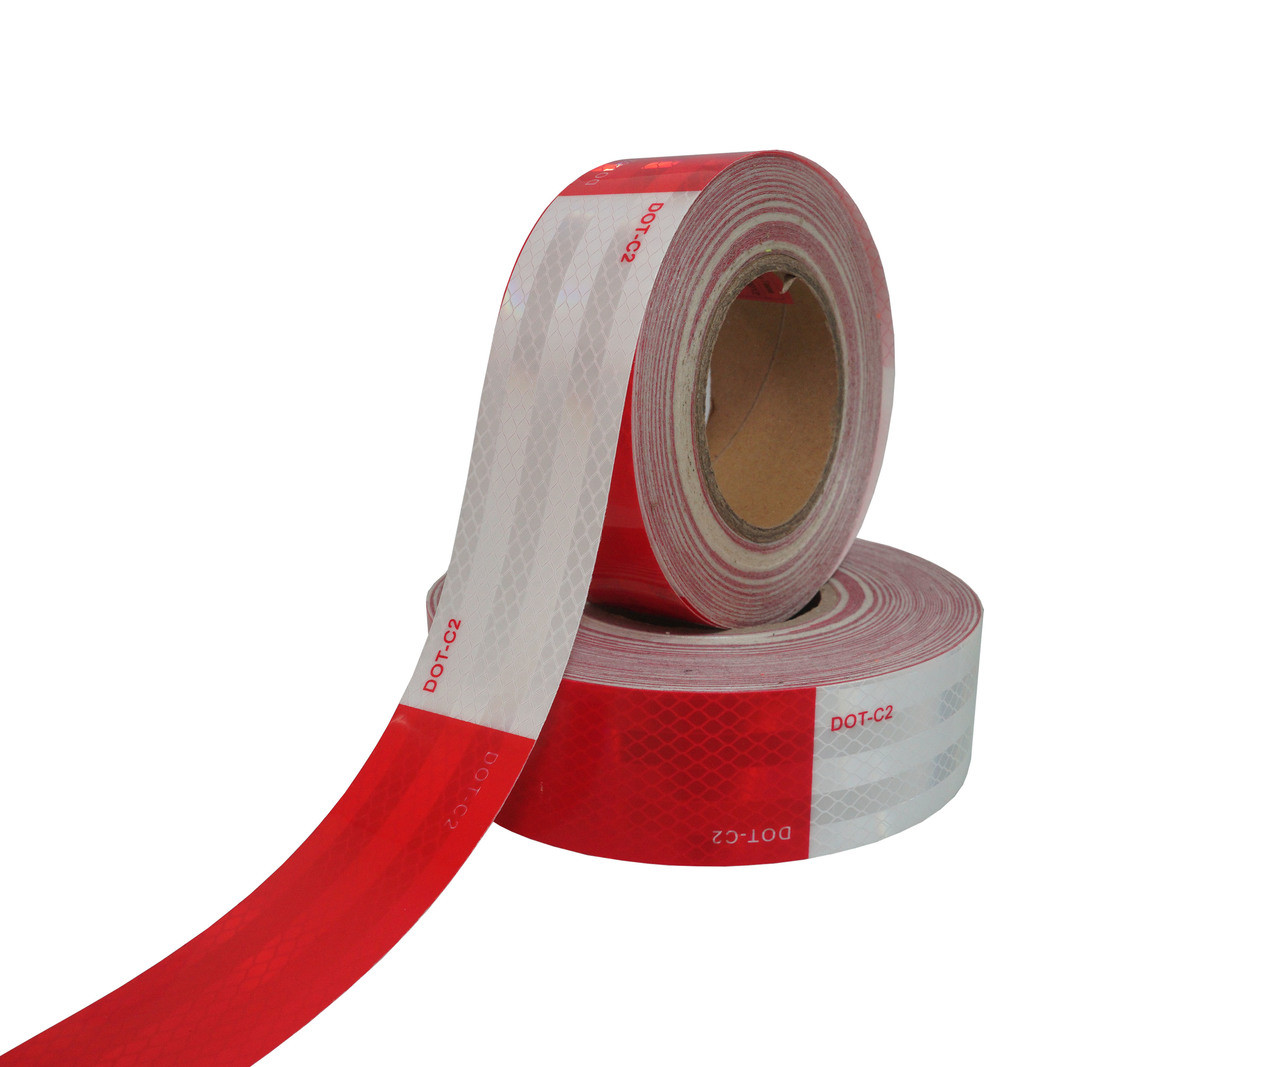 2' x 150' DOT-C2 Reflective Conspicuity Tape